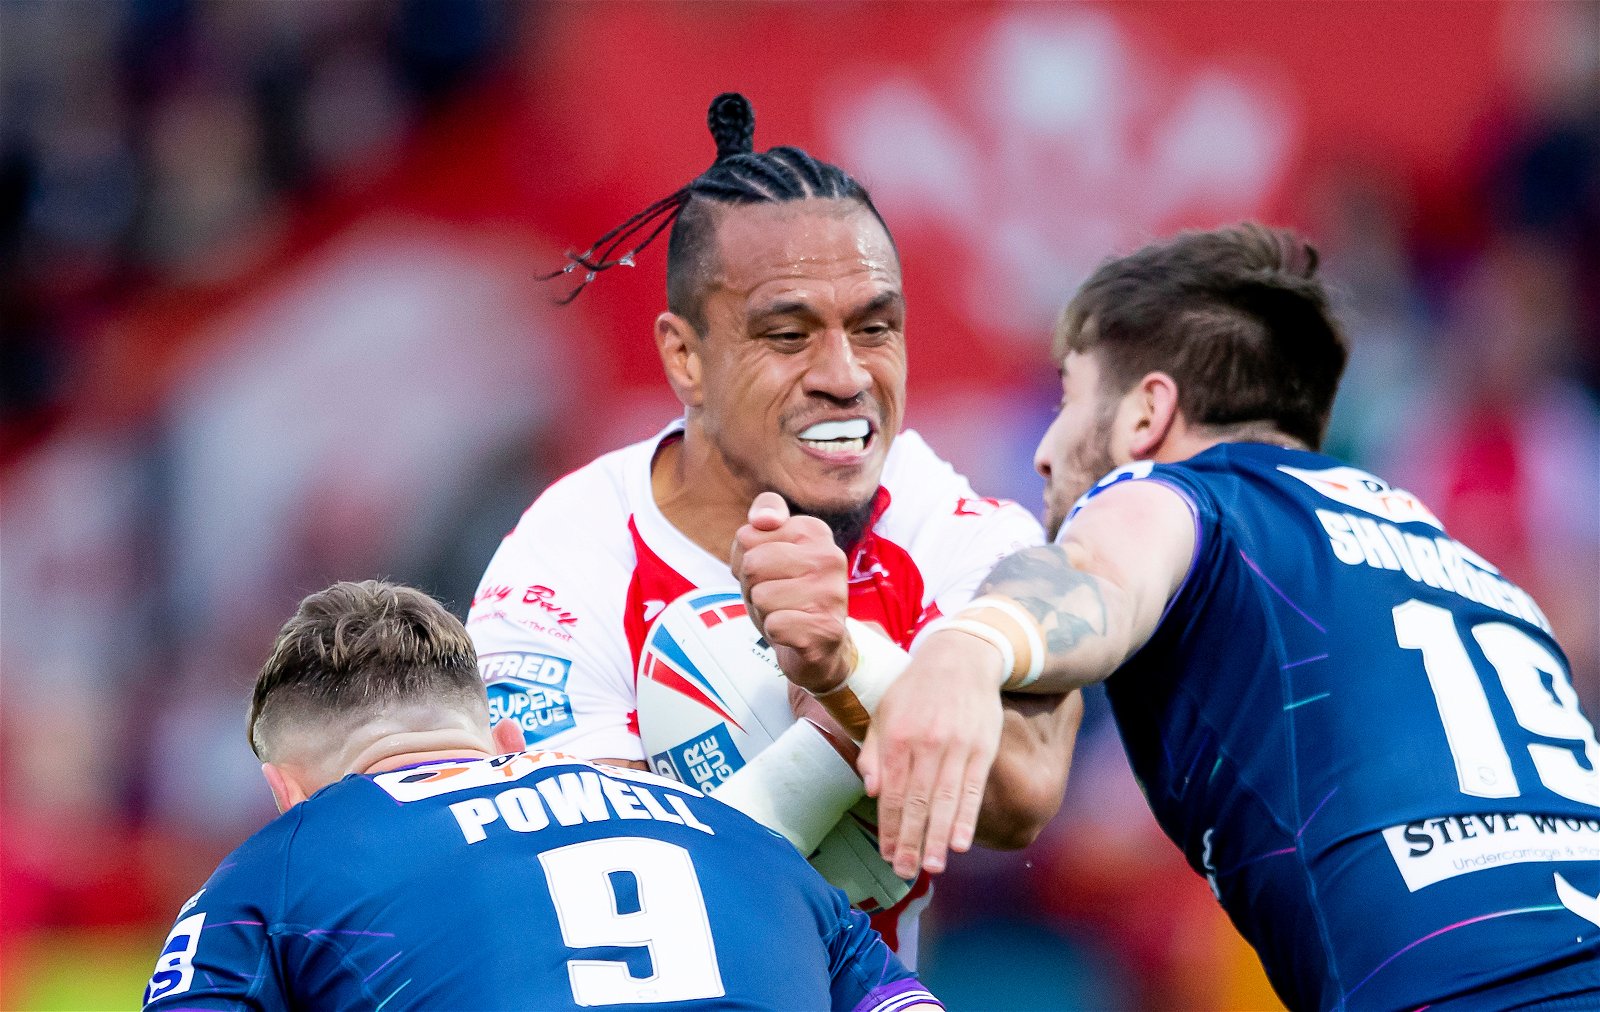 Hull KR Jesse Sue is tackled. He faces Super League disciplinary action.